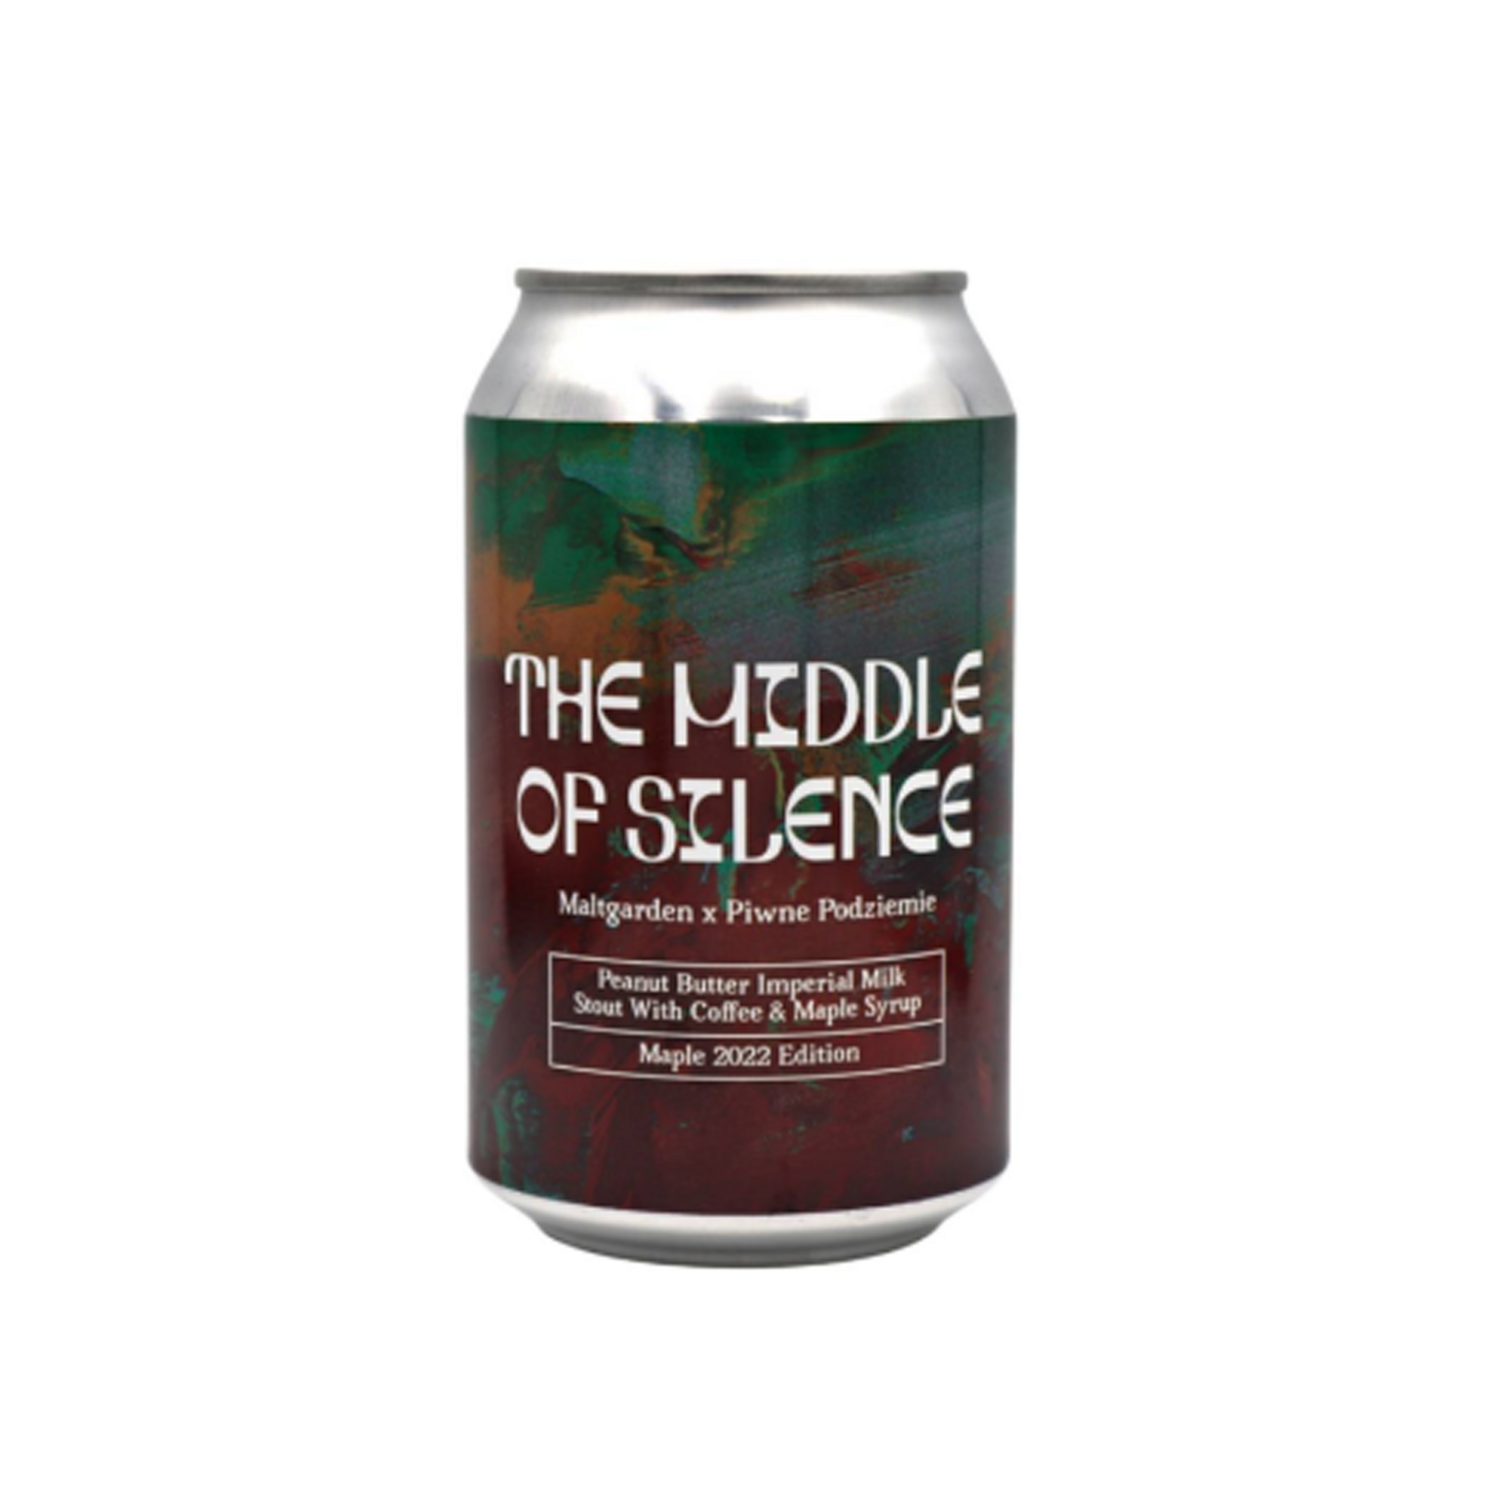 Maltgarden x Piwne Podziemie The Middle of Silence Maple 2022 Edition Imperial Milk Stout